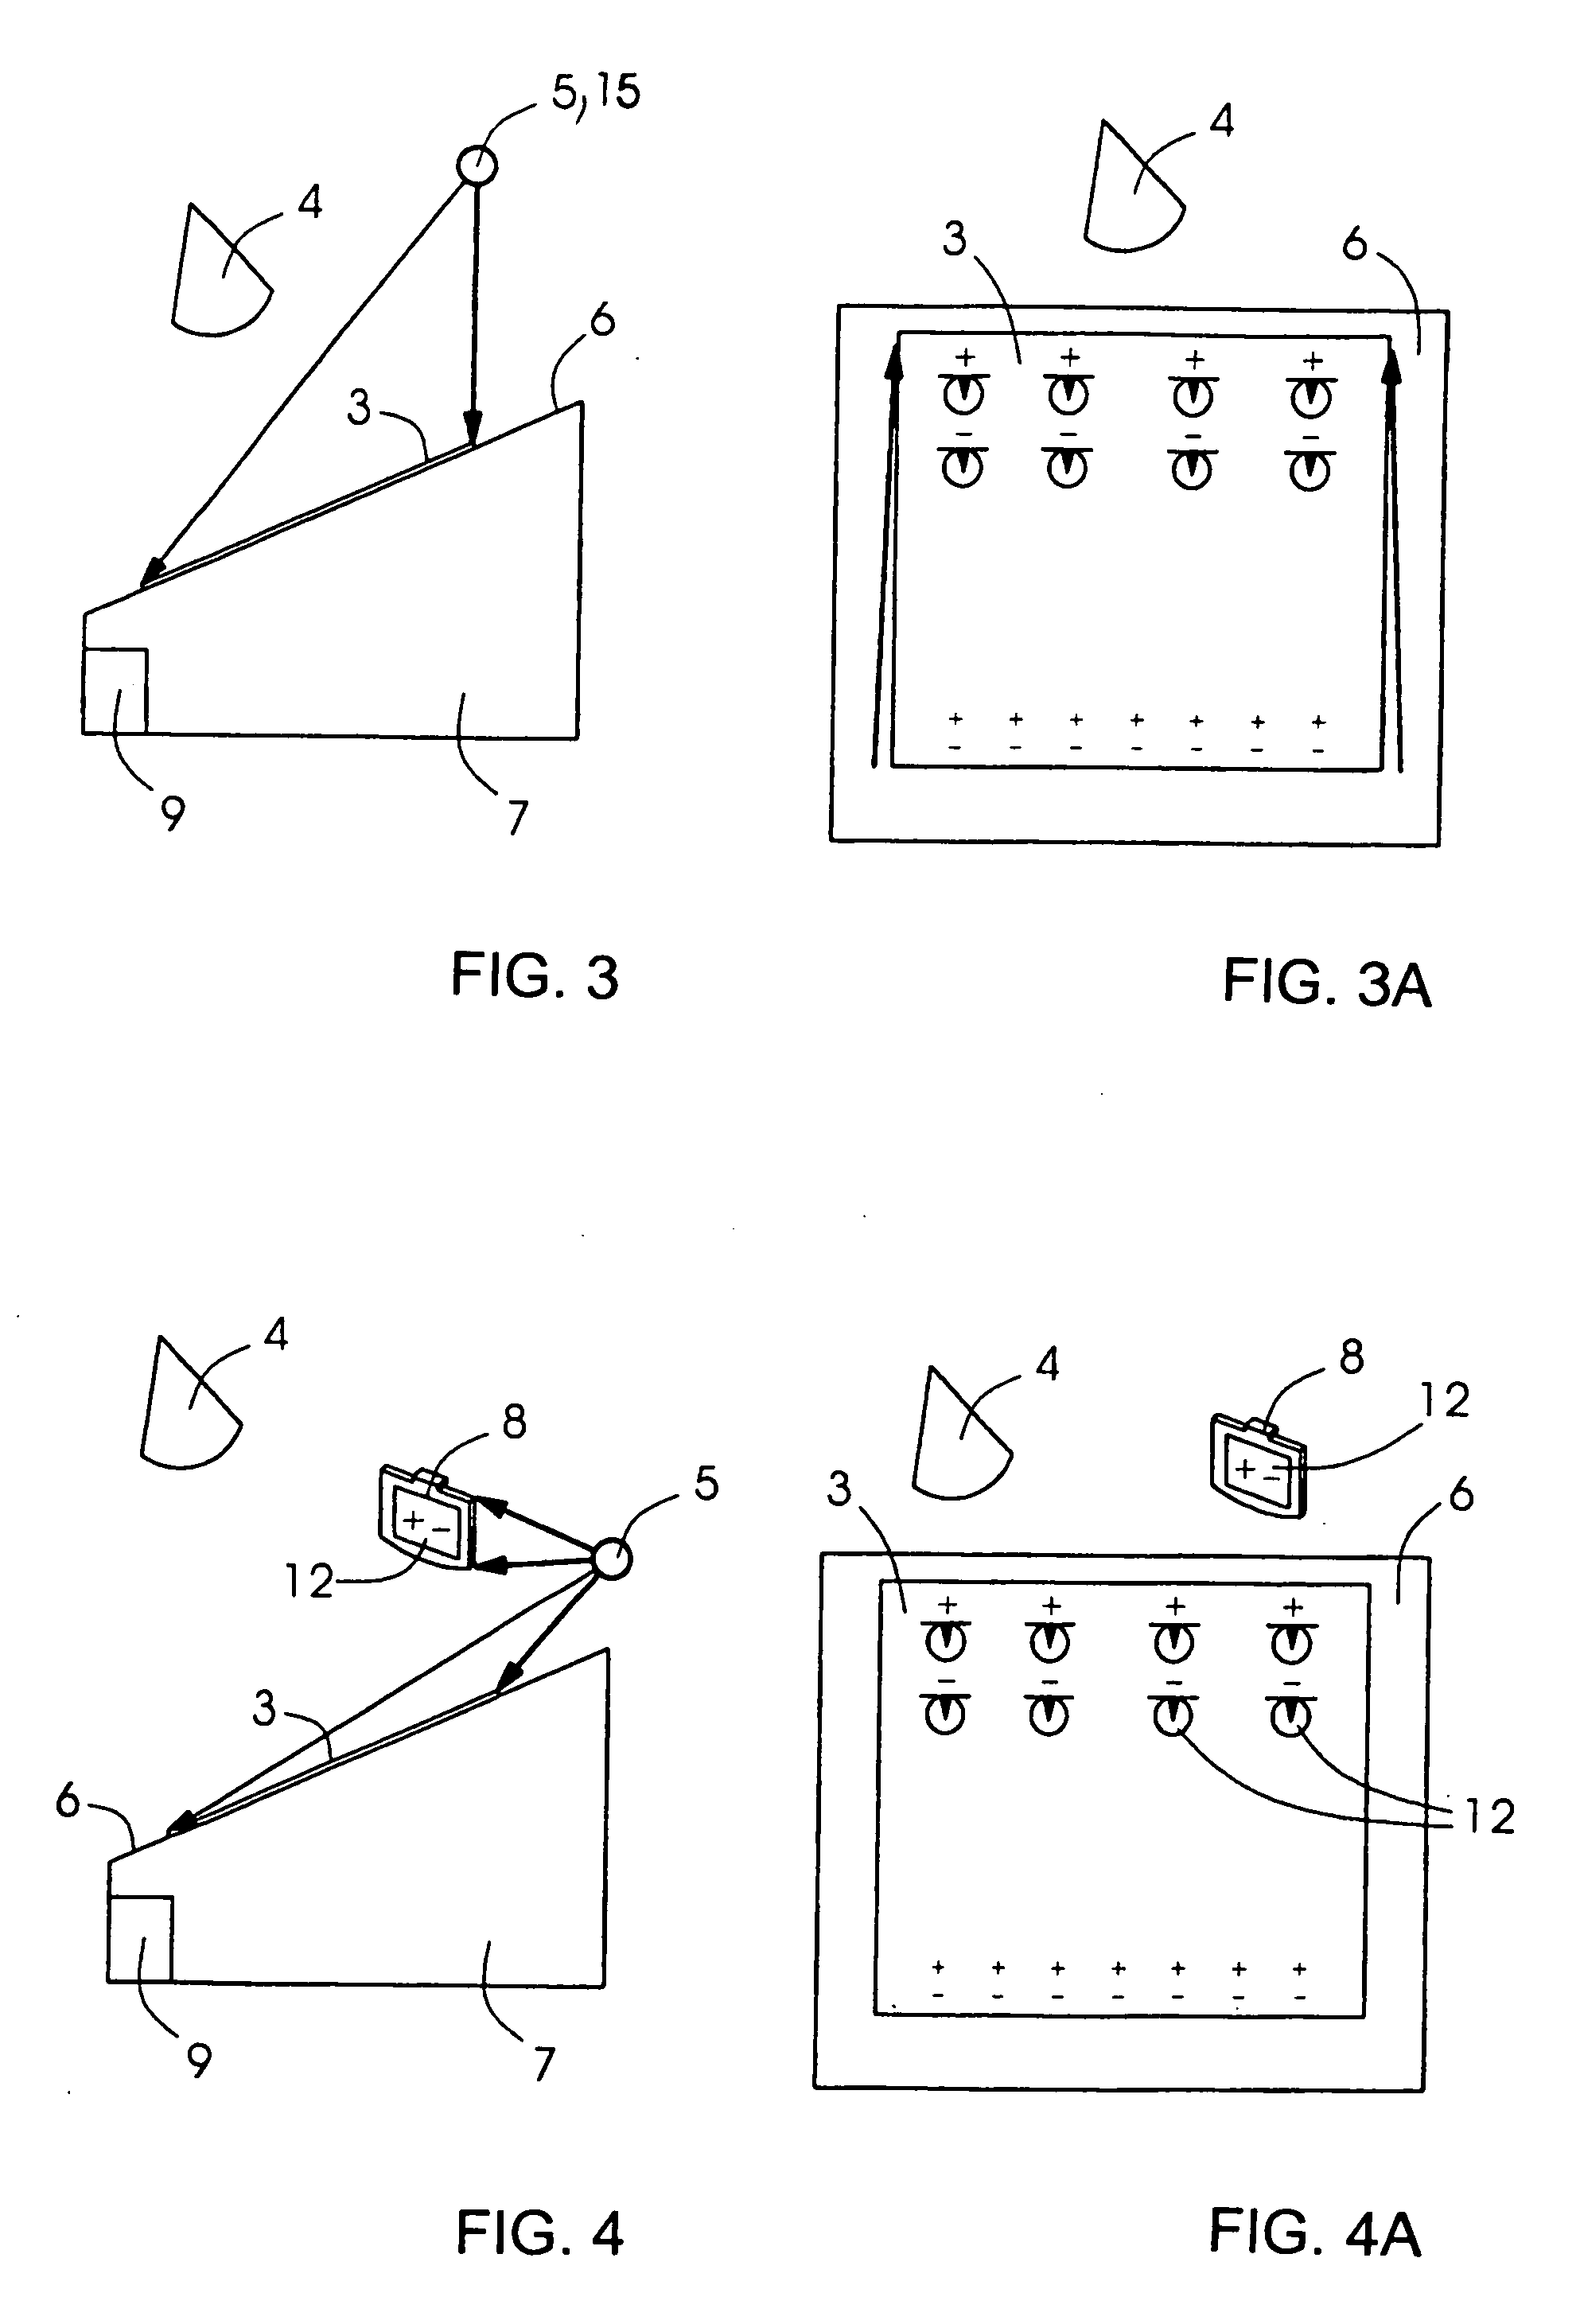 Projection-area dependent display/operating device